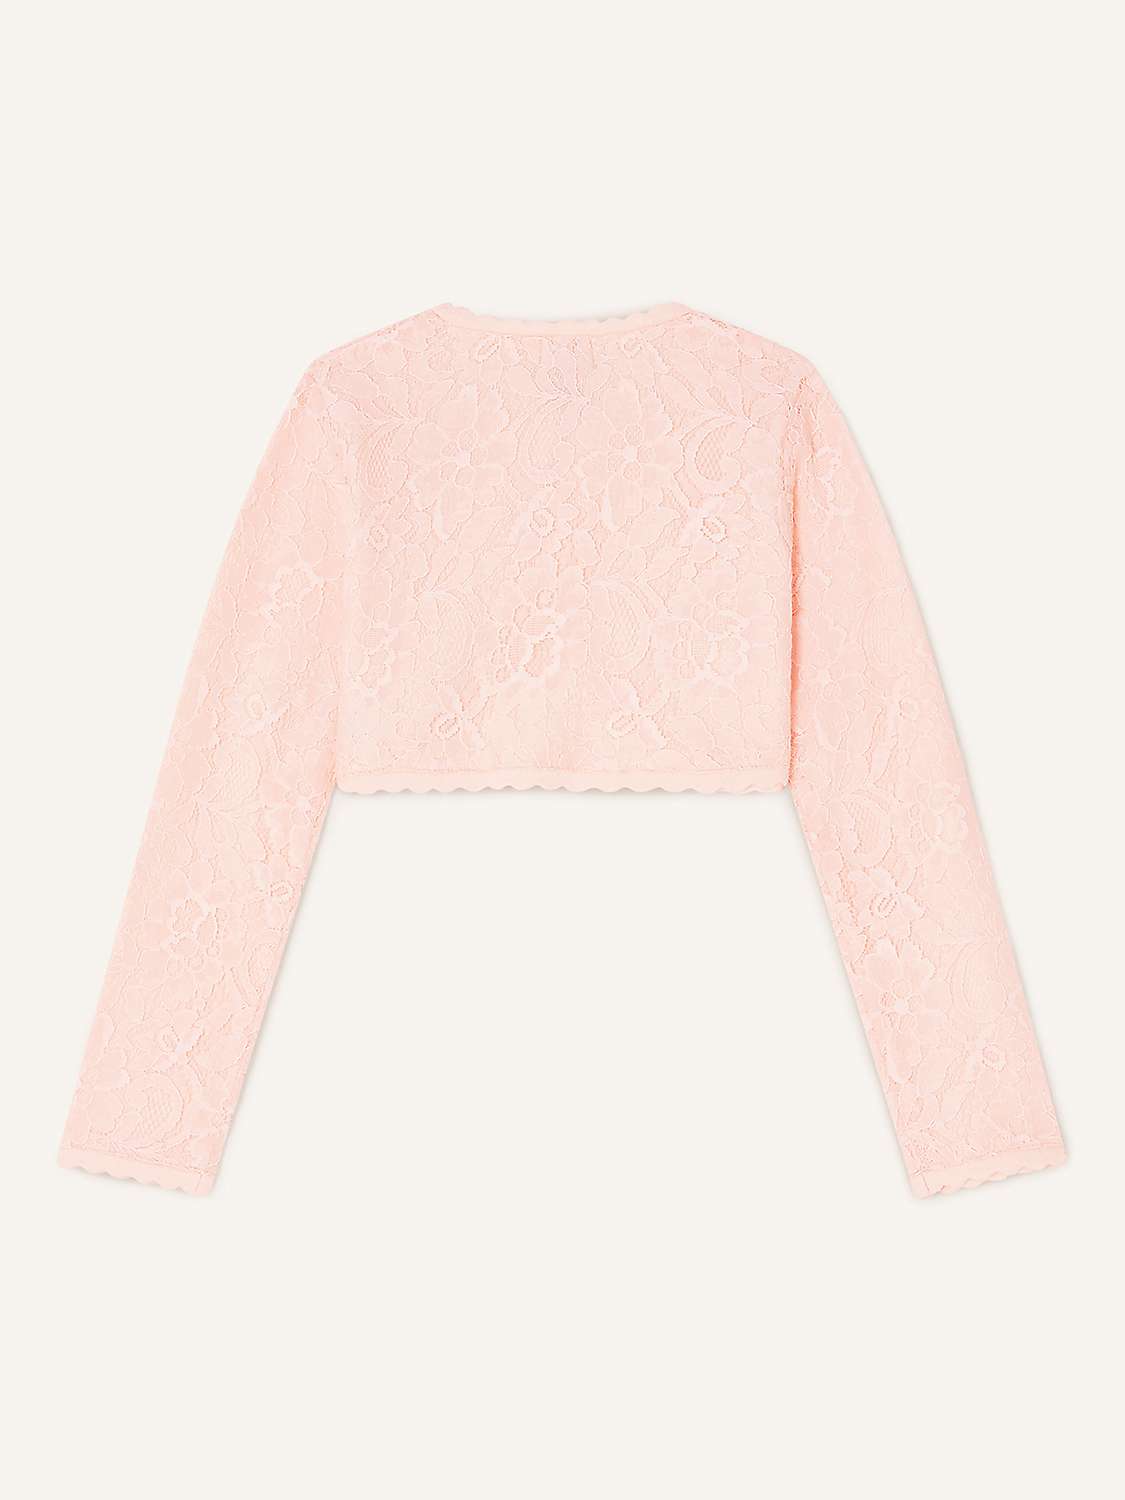 Buy Monsoon Kids' Lace Cropped Cardigan Online at johnlewis.com